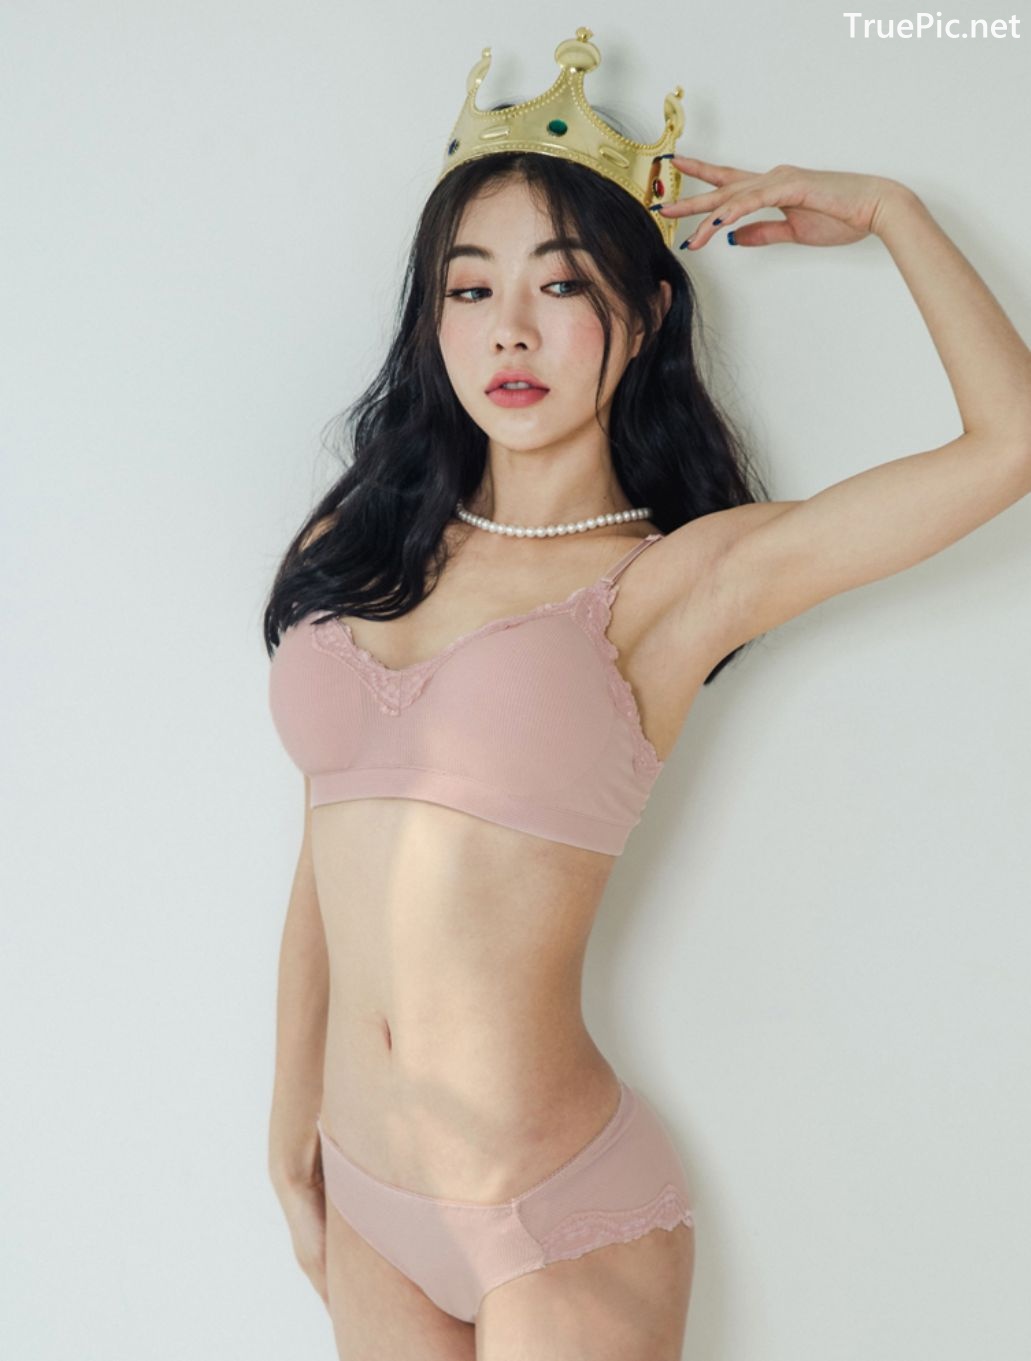 Image-Korean-Fashion-Model-An-Seo-Rin-7-Lingerie-Set-For-A-Week-TruePic.net- Picture-40